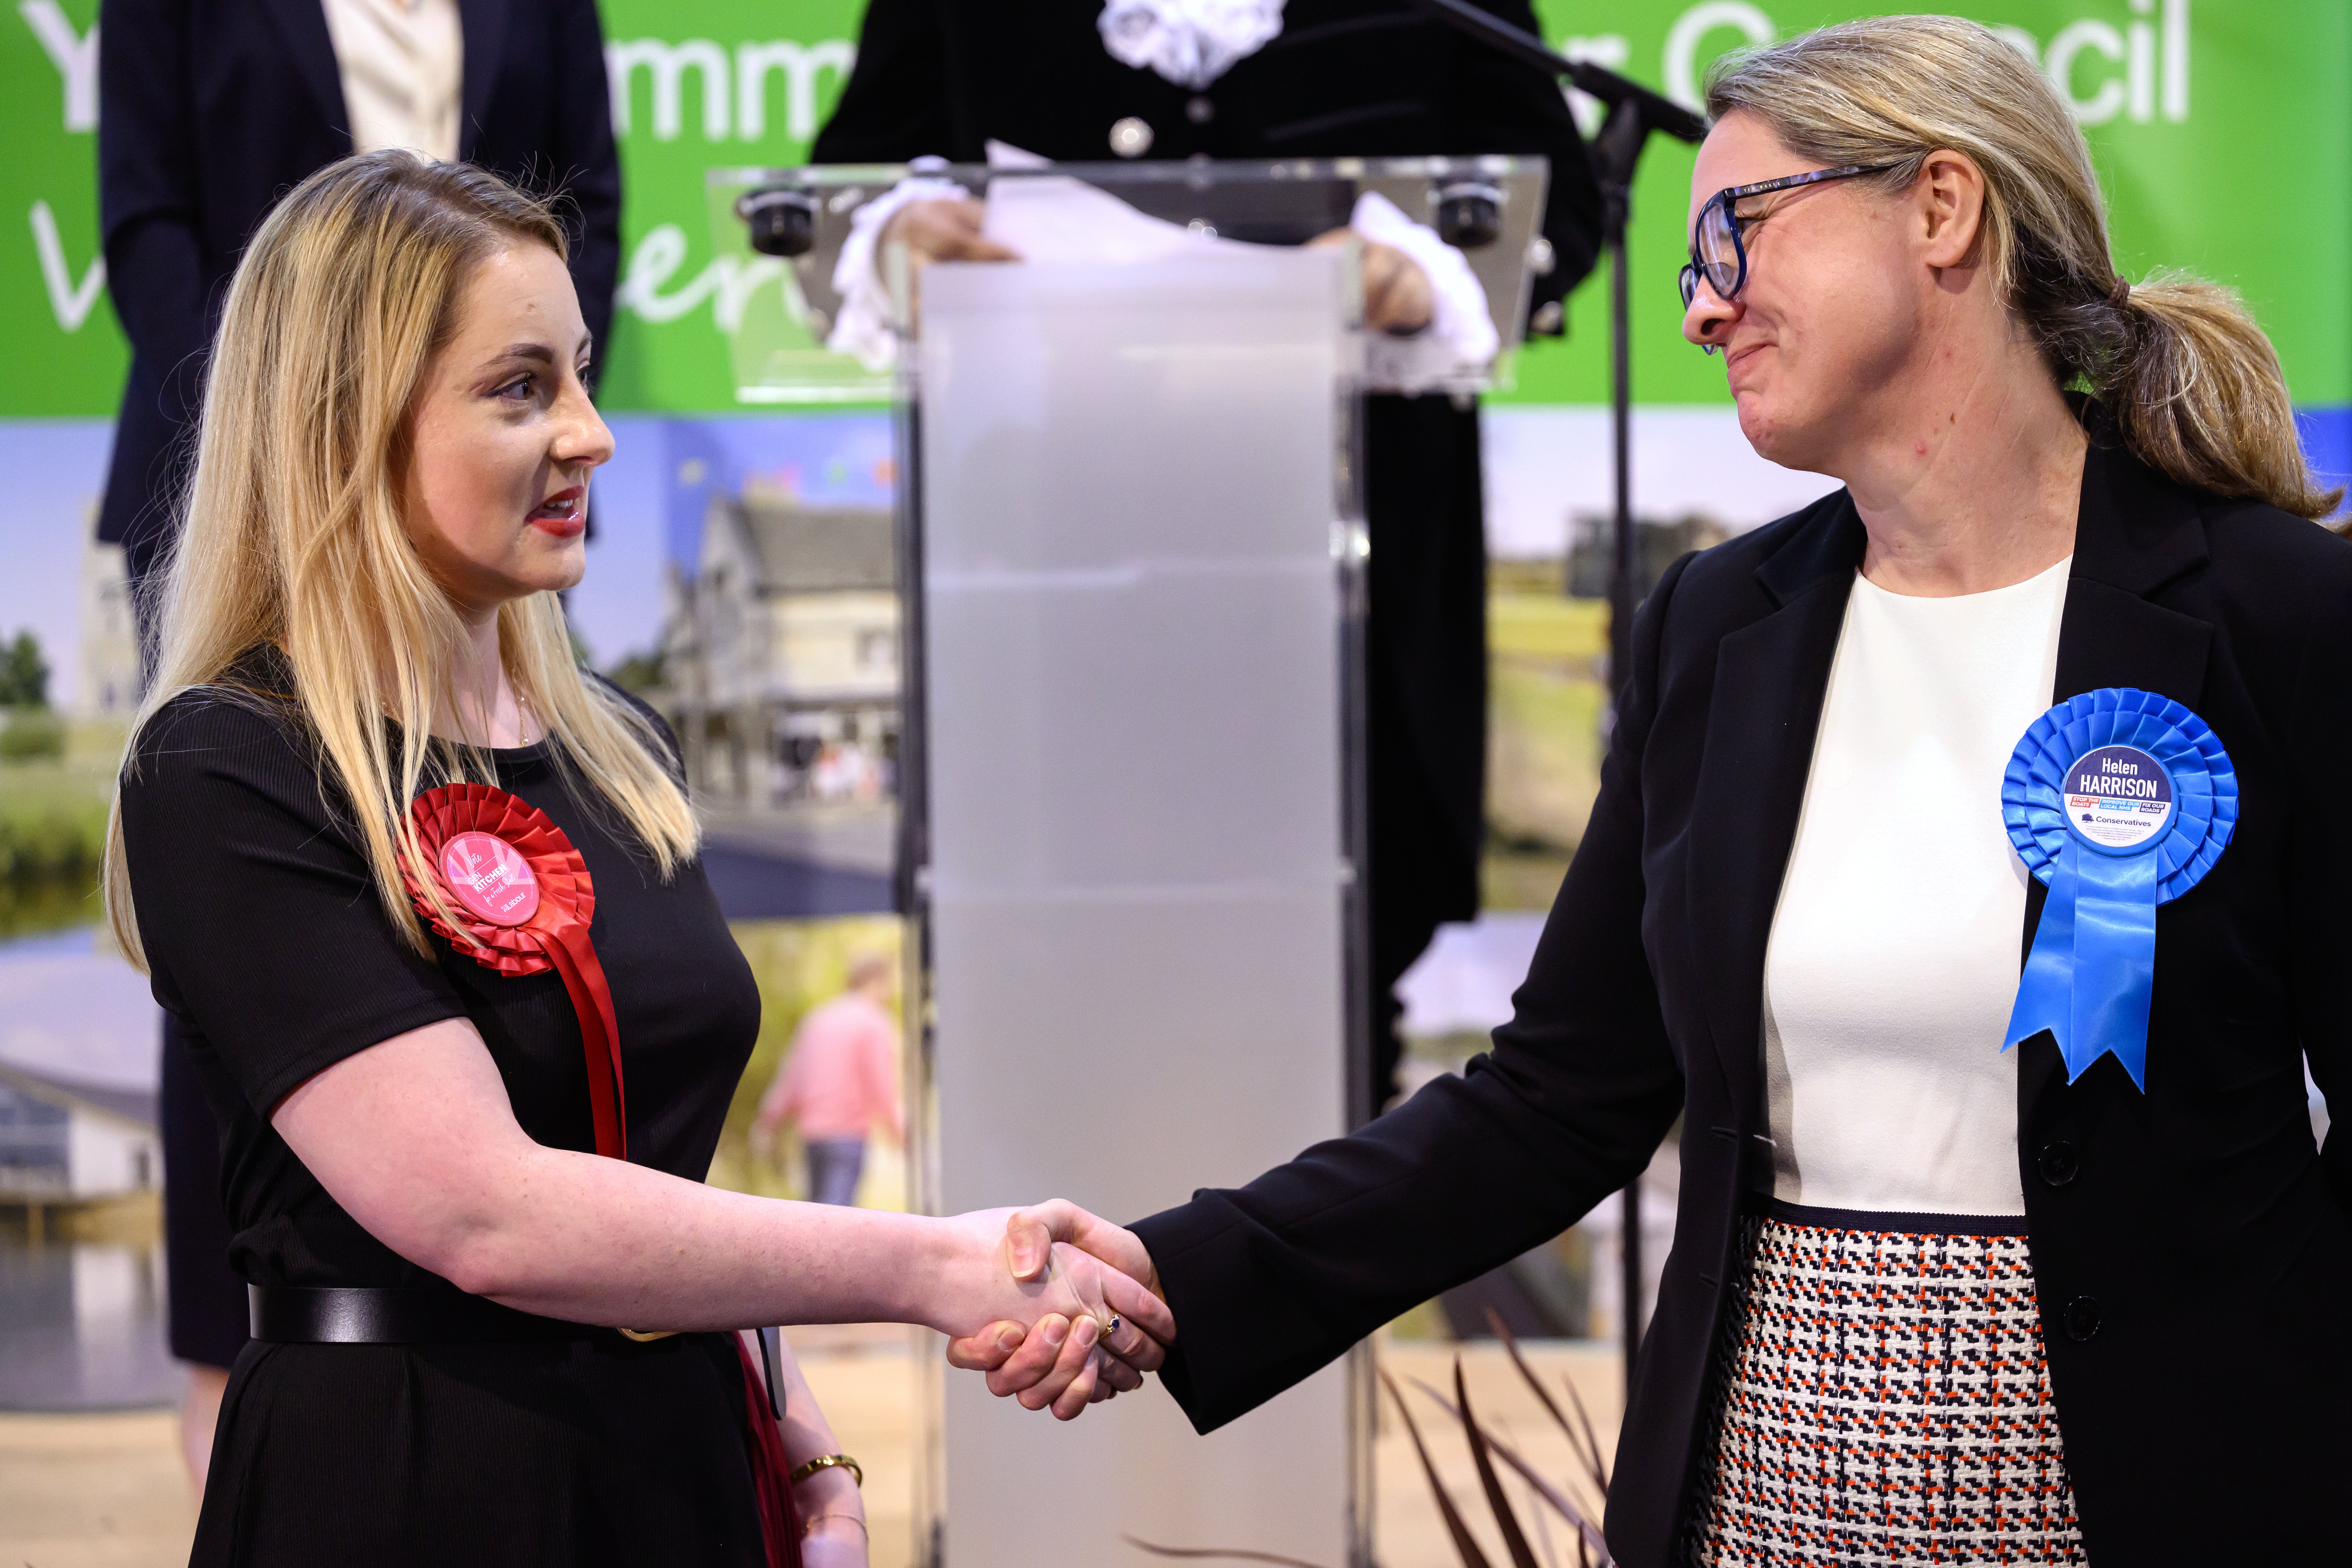 Labour Party candidate Gen Kitchen shakes hands with Conservative Party candidate Helen Harrison after being declared the winner